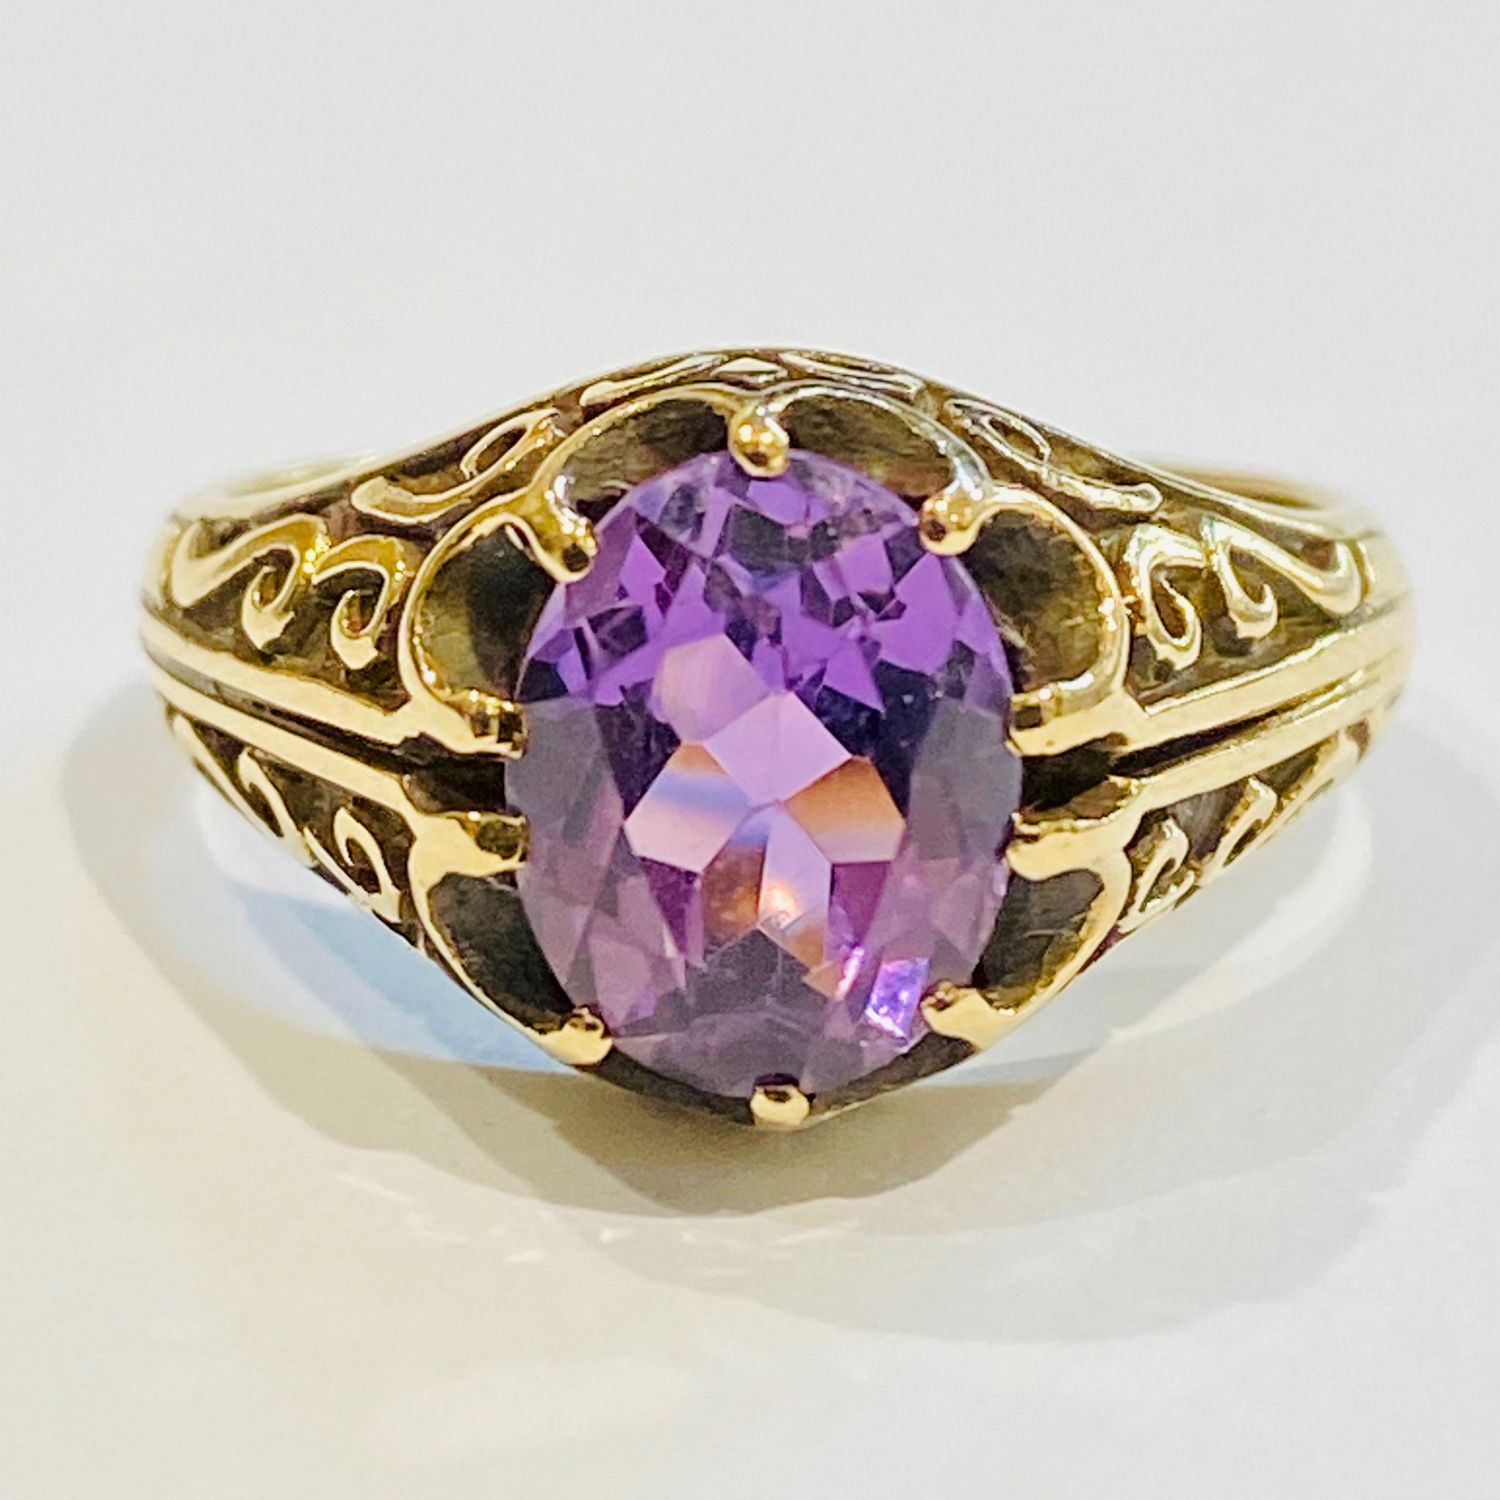 Vintage 9ct Gold and Amethyst Ring - Jewellery & Gold - Hemswell ...